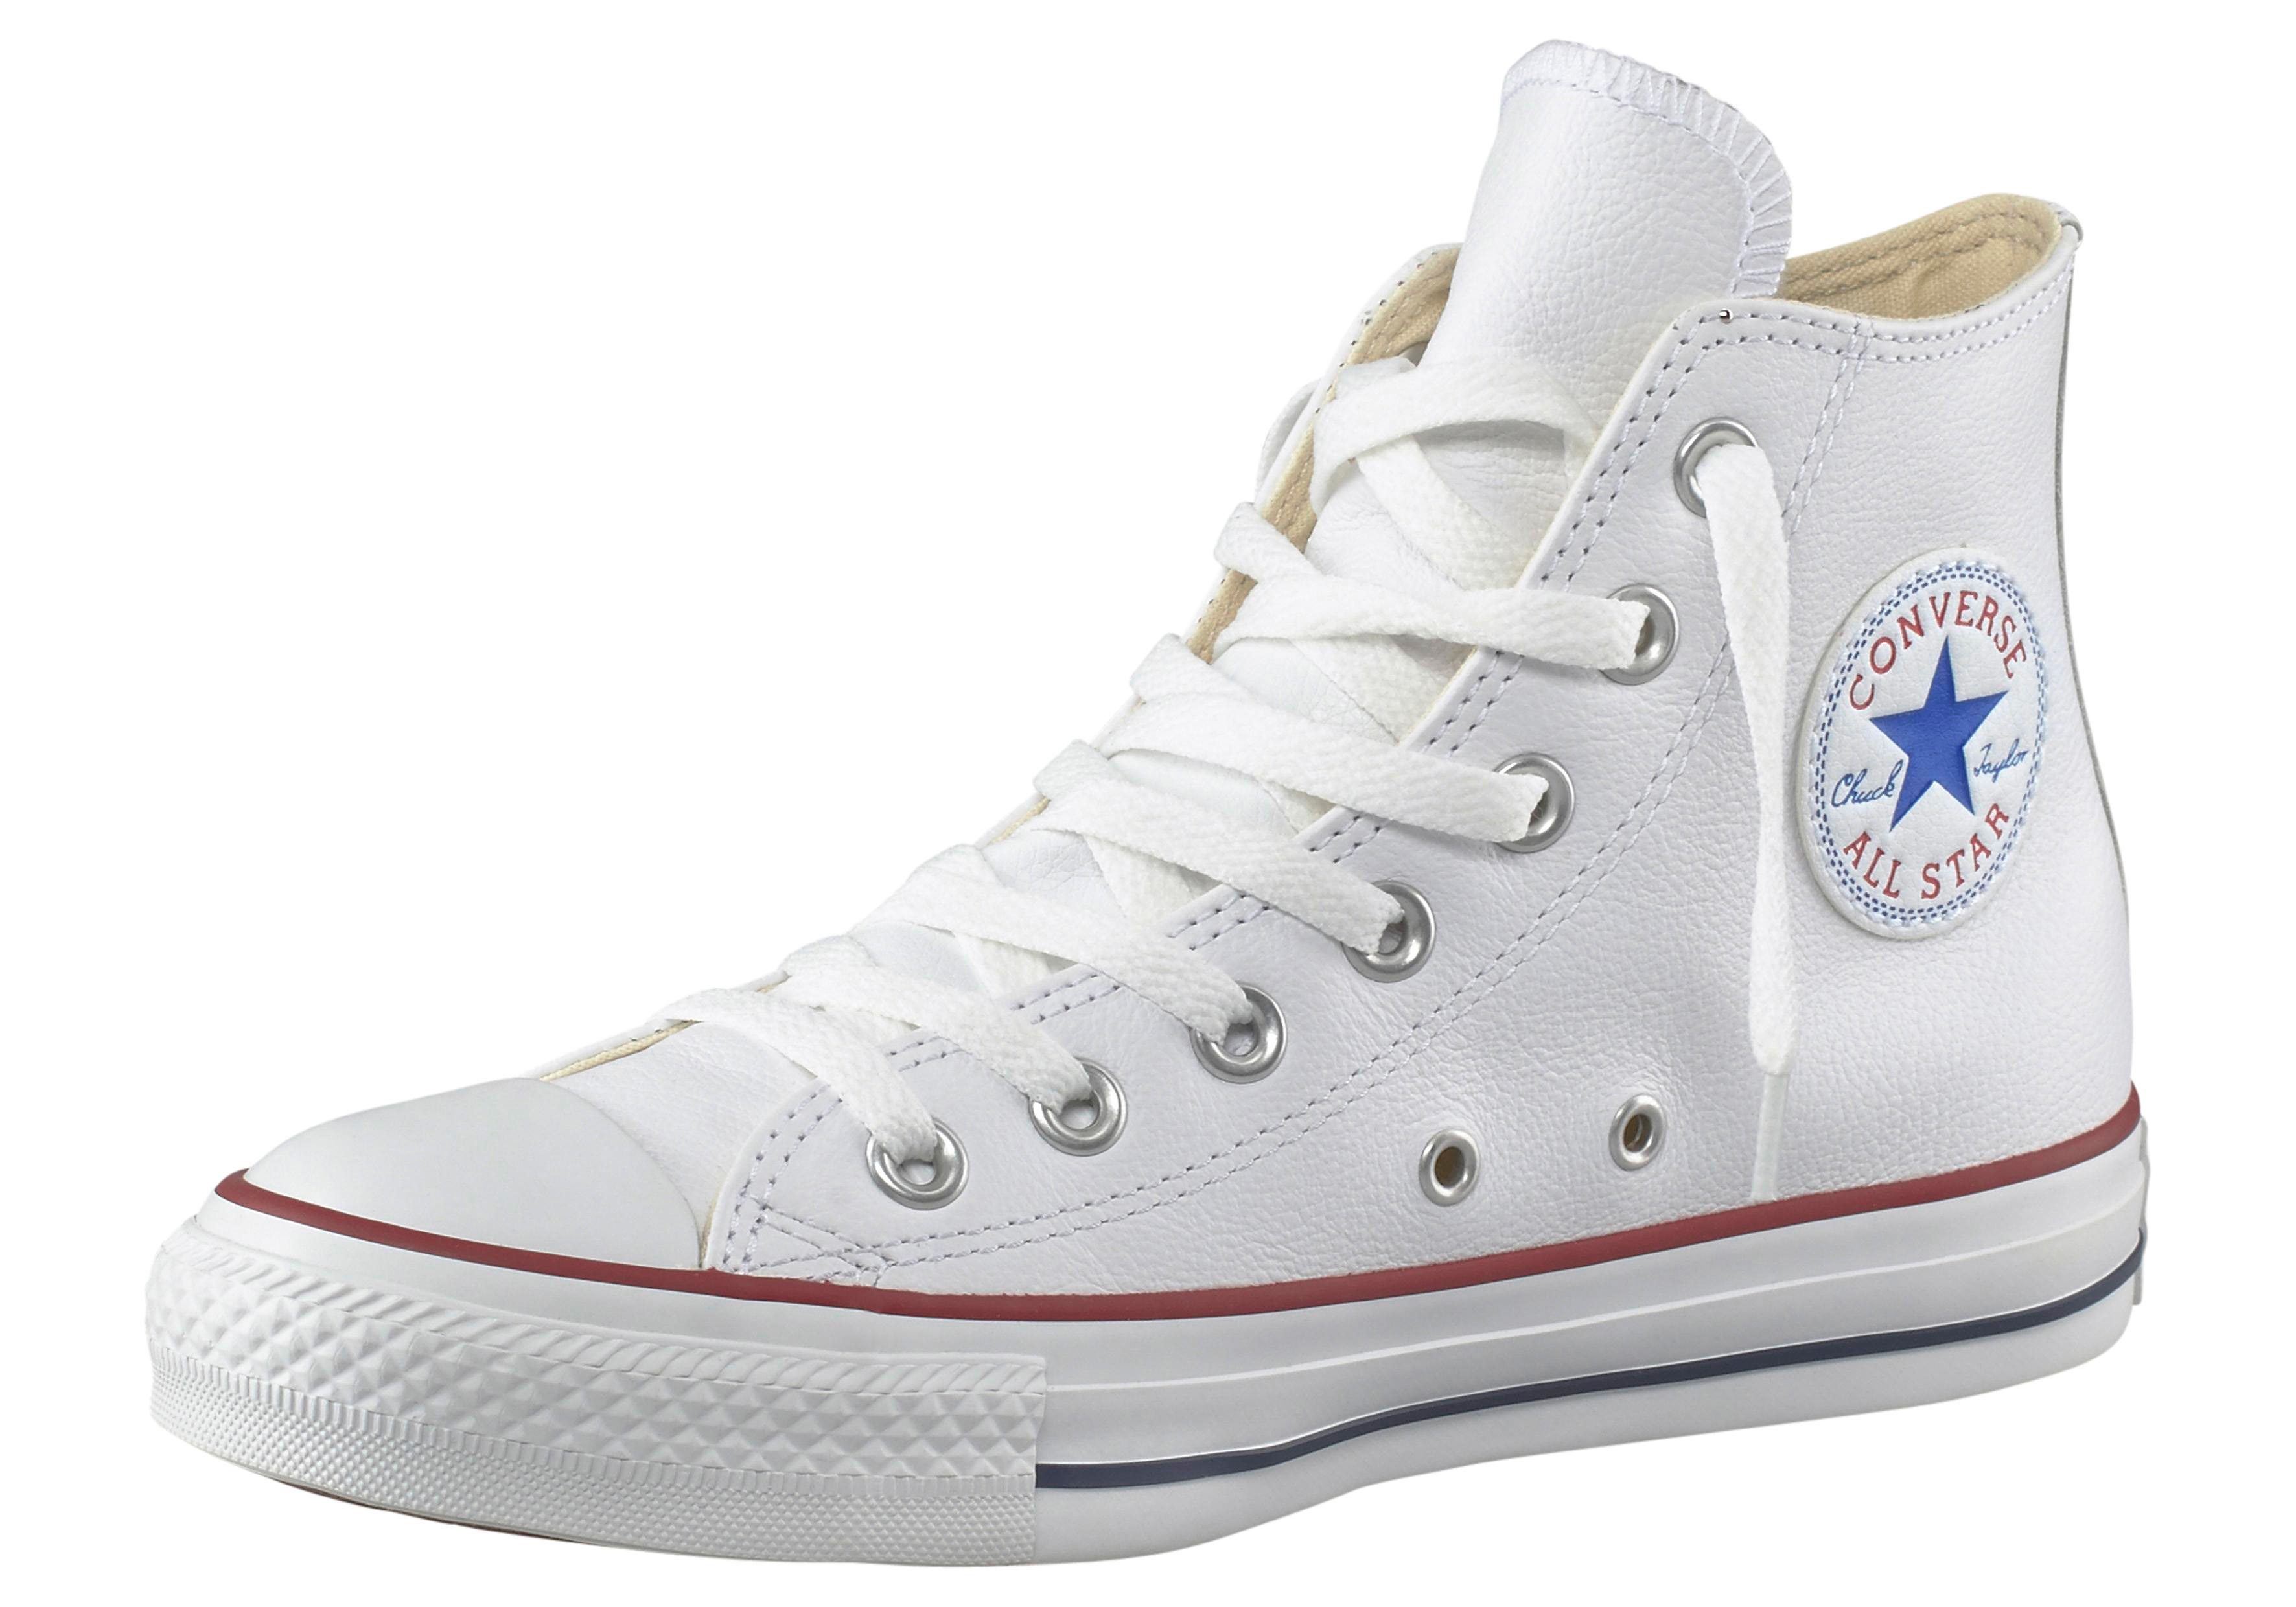 Converse Sneaker "Chuck Taylor All Star Basic Leather Hi"